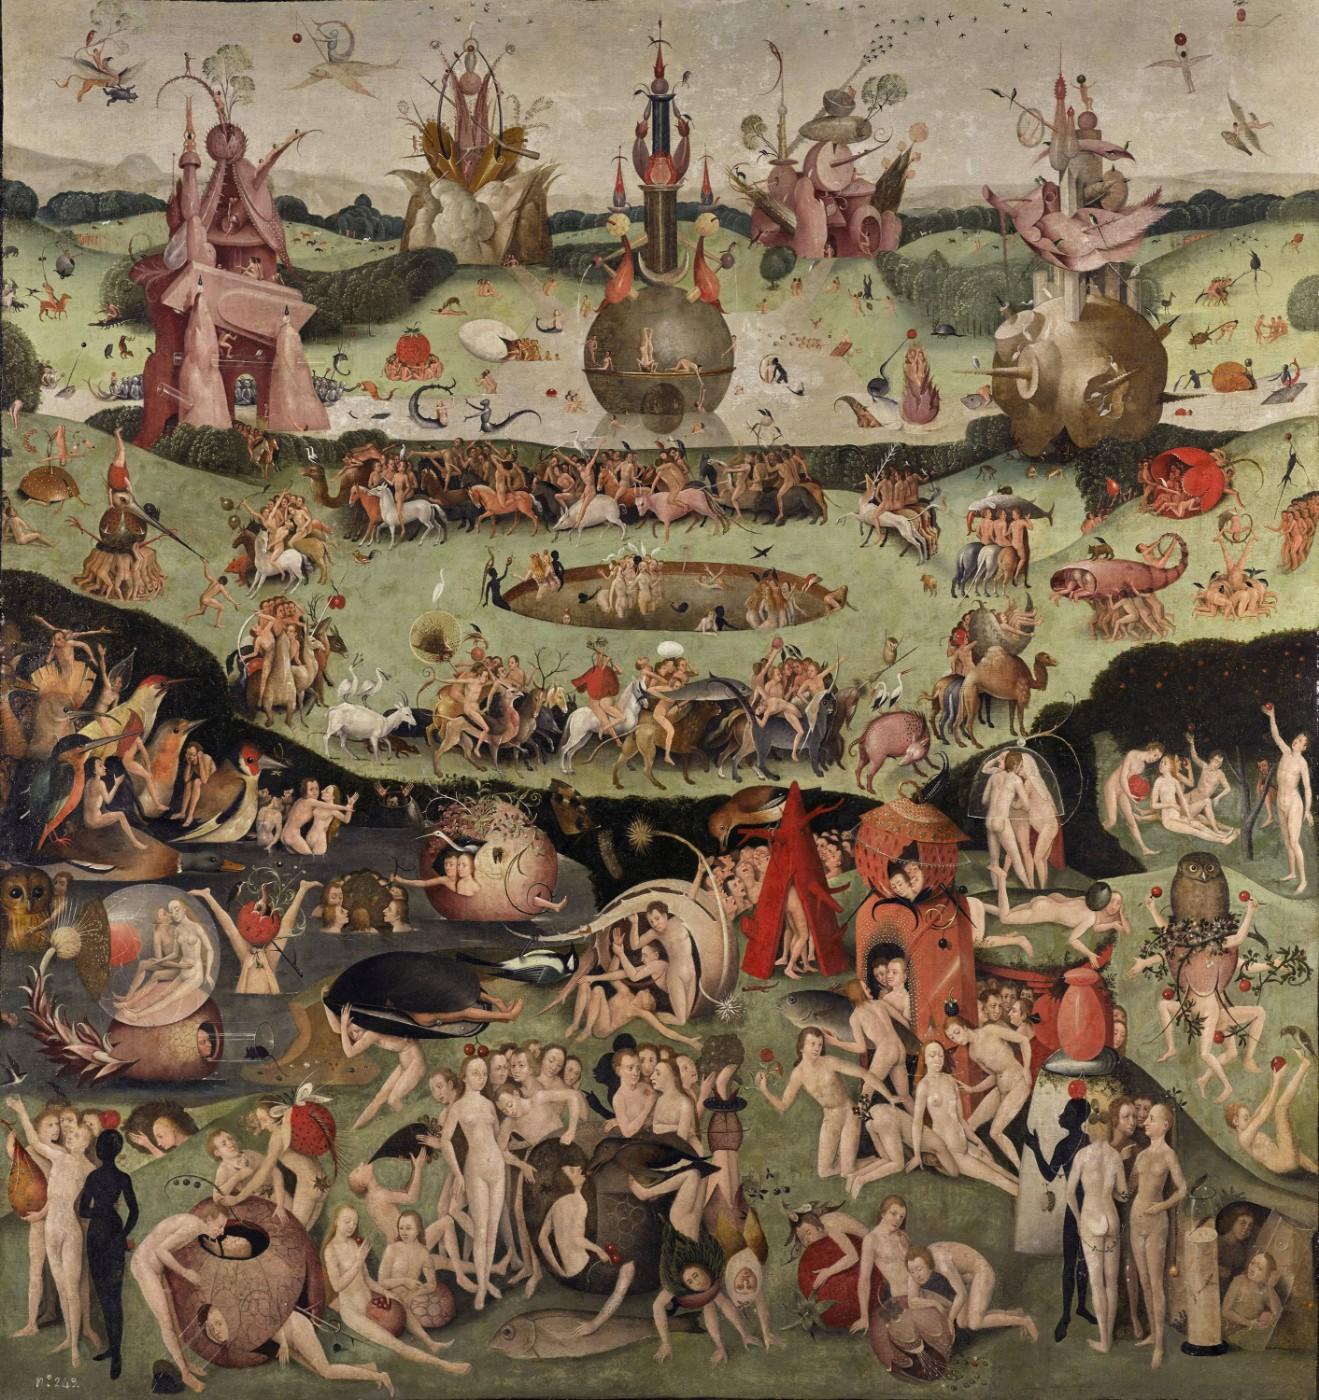 Contemporary follower of Hieronymus Bosch, The Garden of Earthly Delights, c.1515